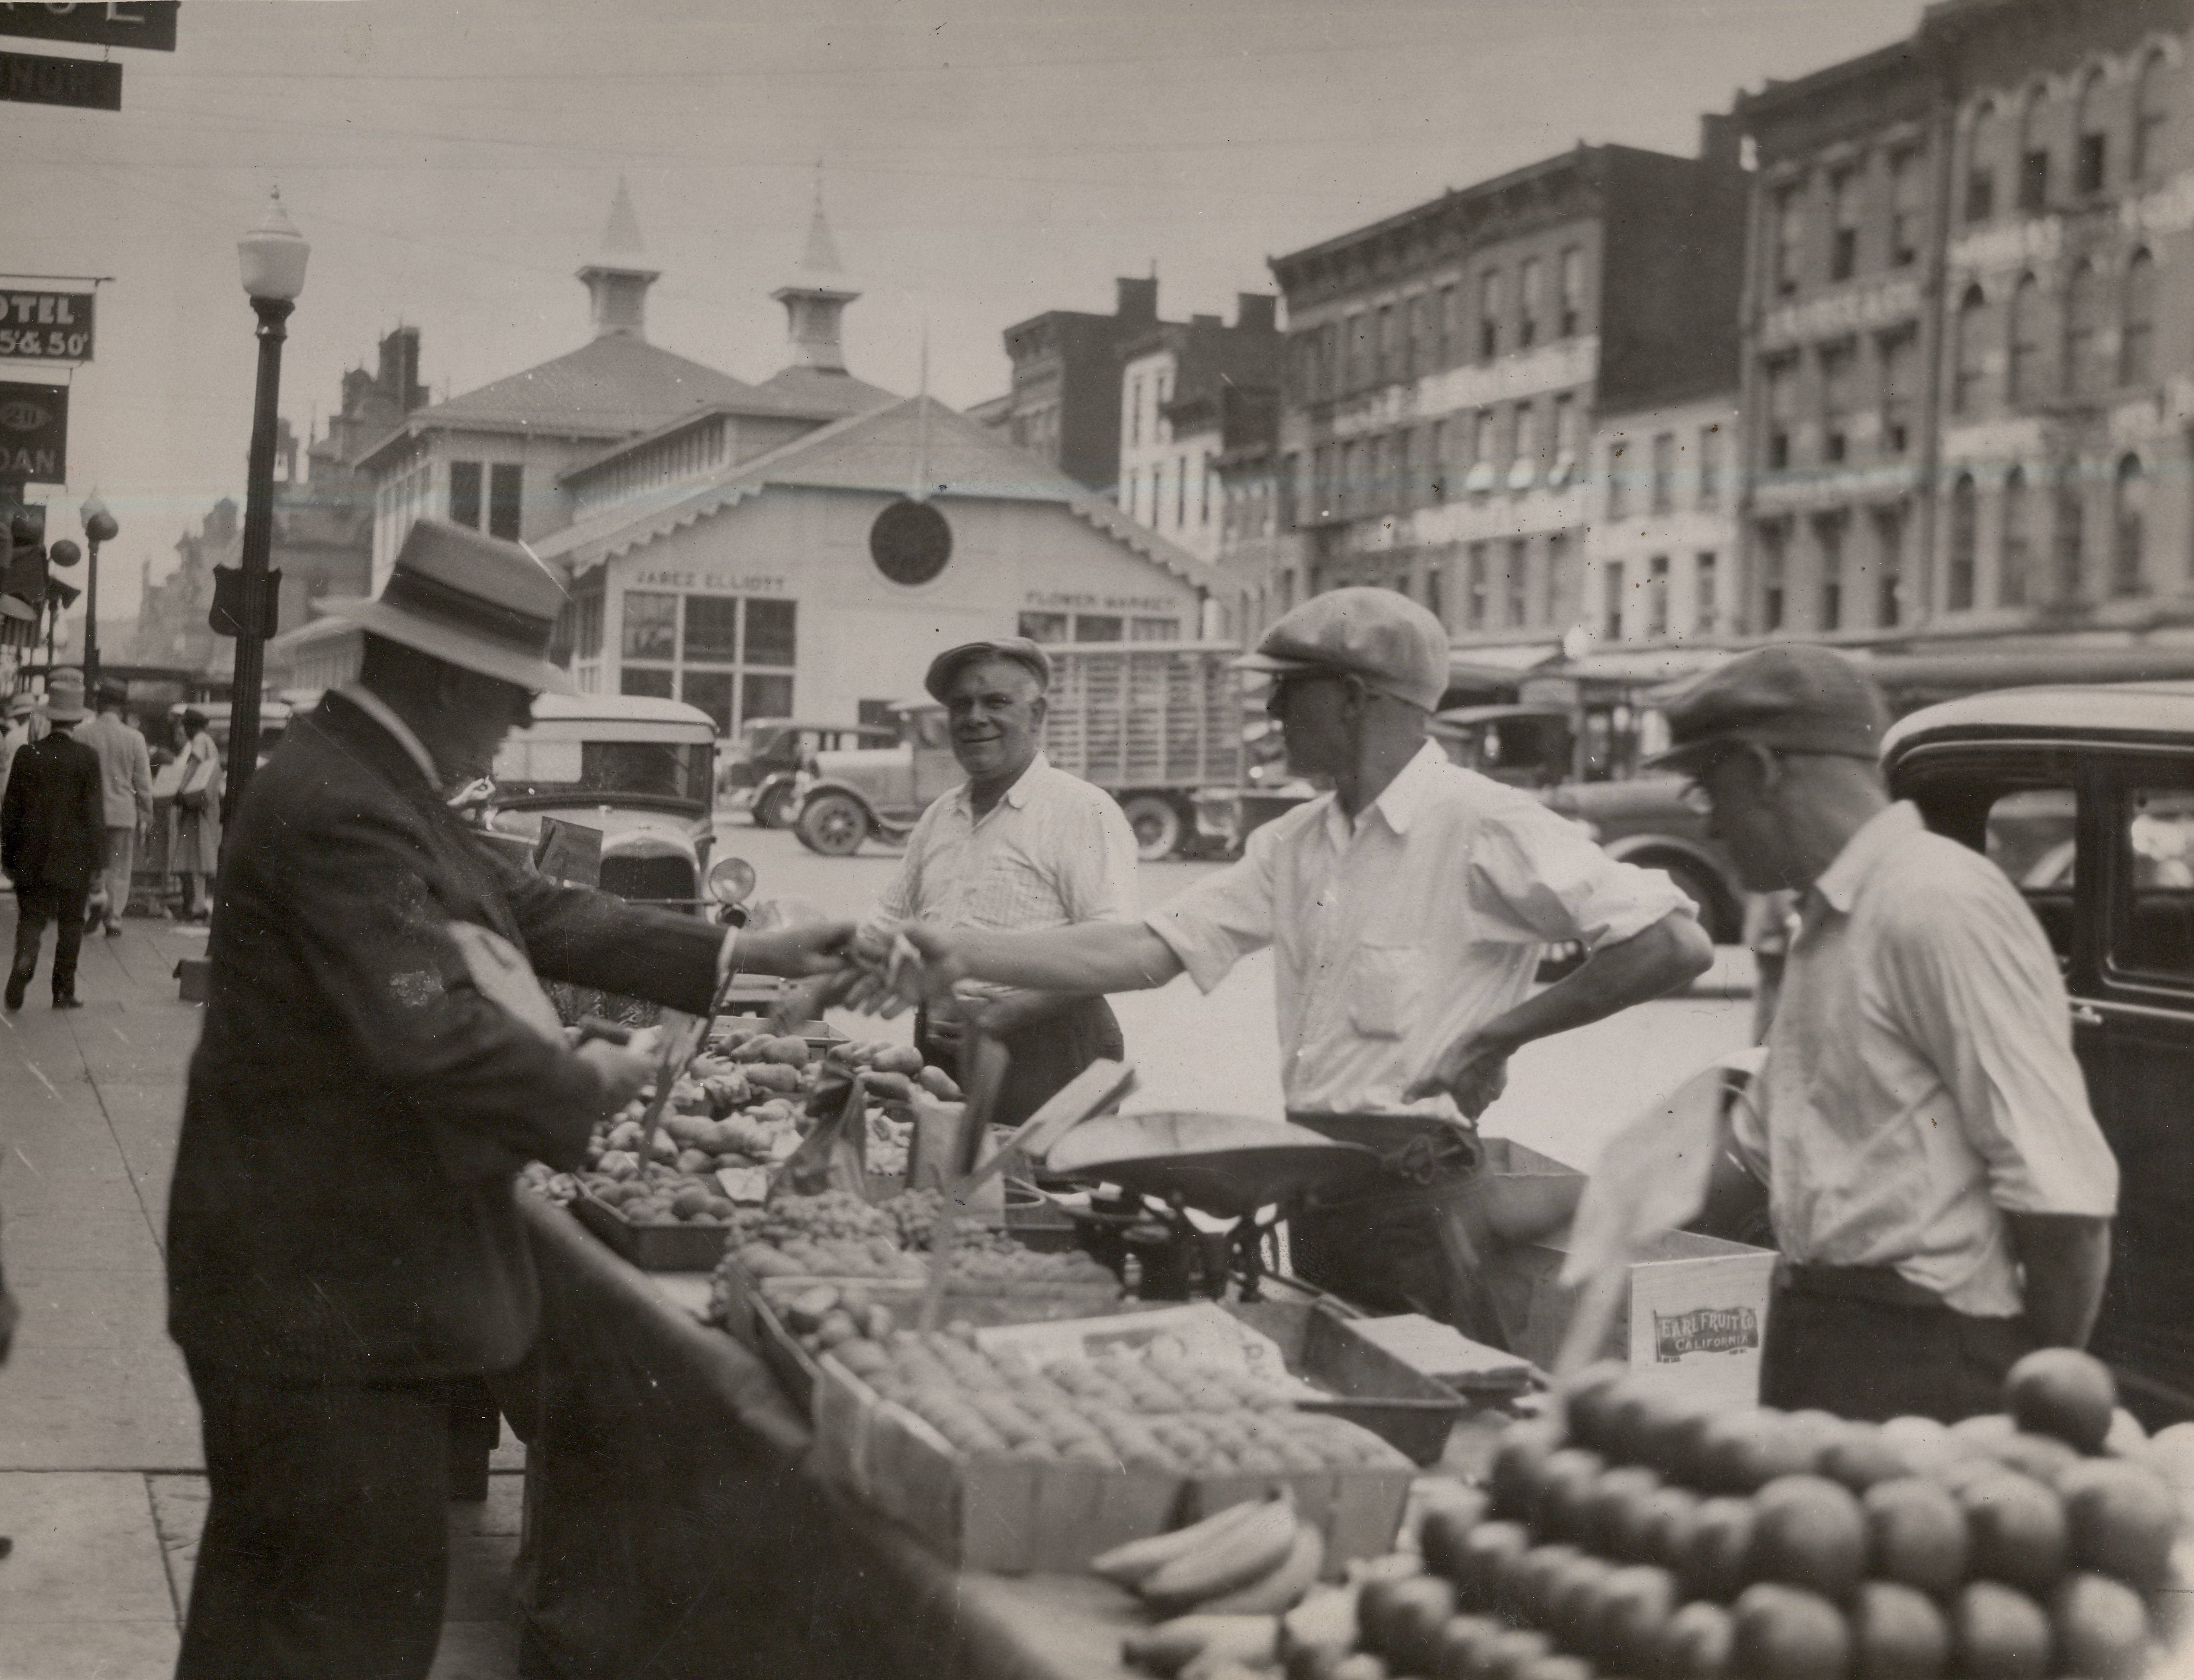 Cincinnati was once a hub for public markets. And Sixth Street Market was the place to be